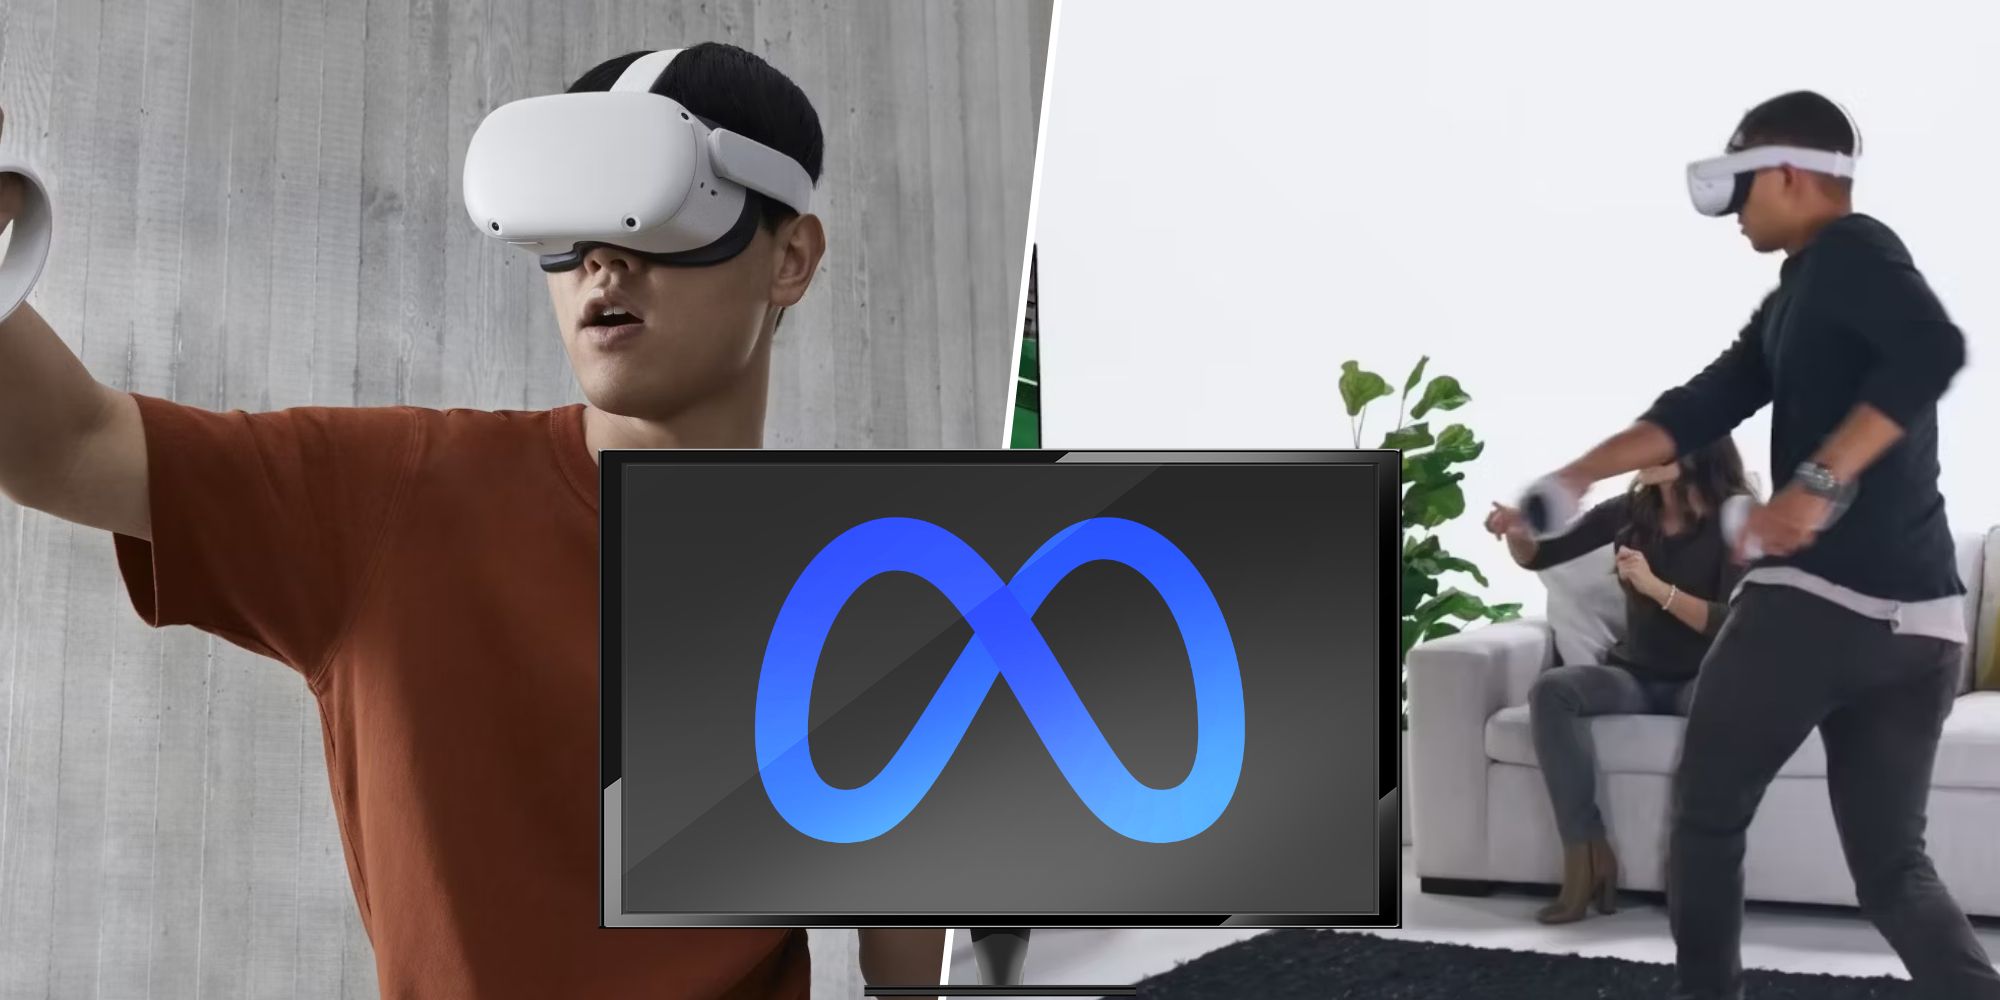 How to cast Oculus Quest 2 to your TV, PC or phone